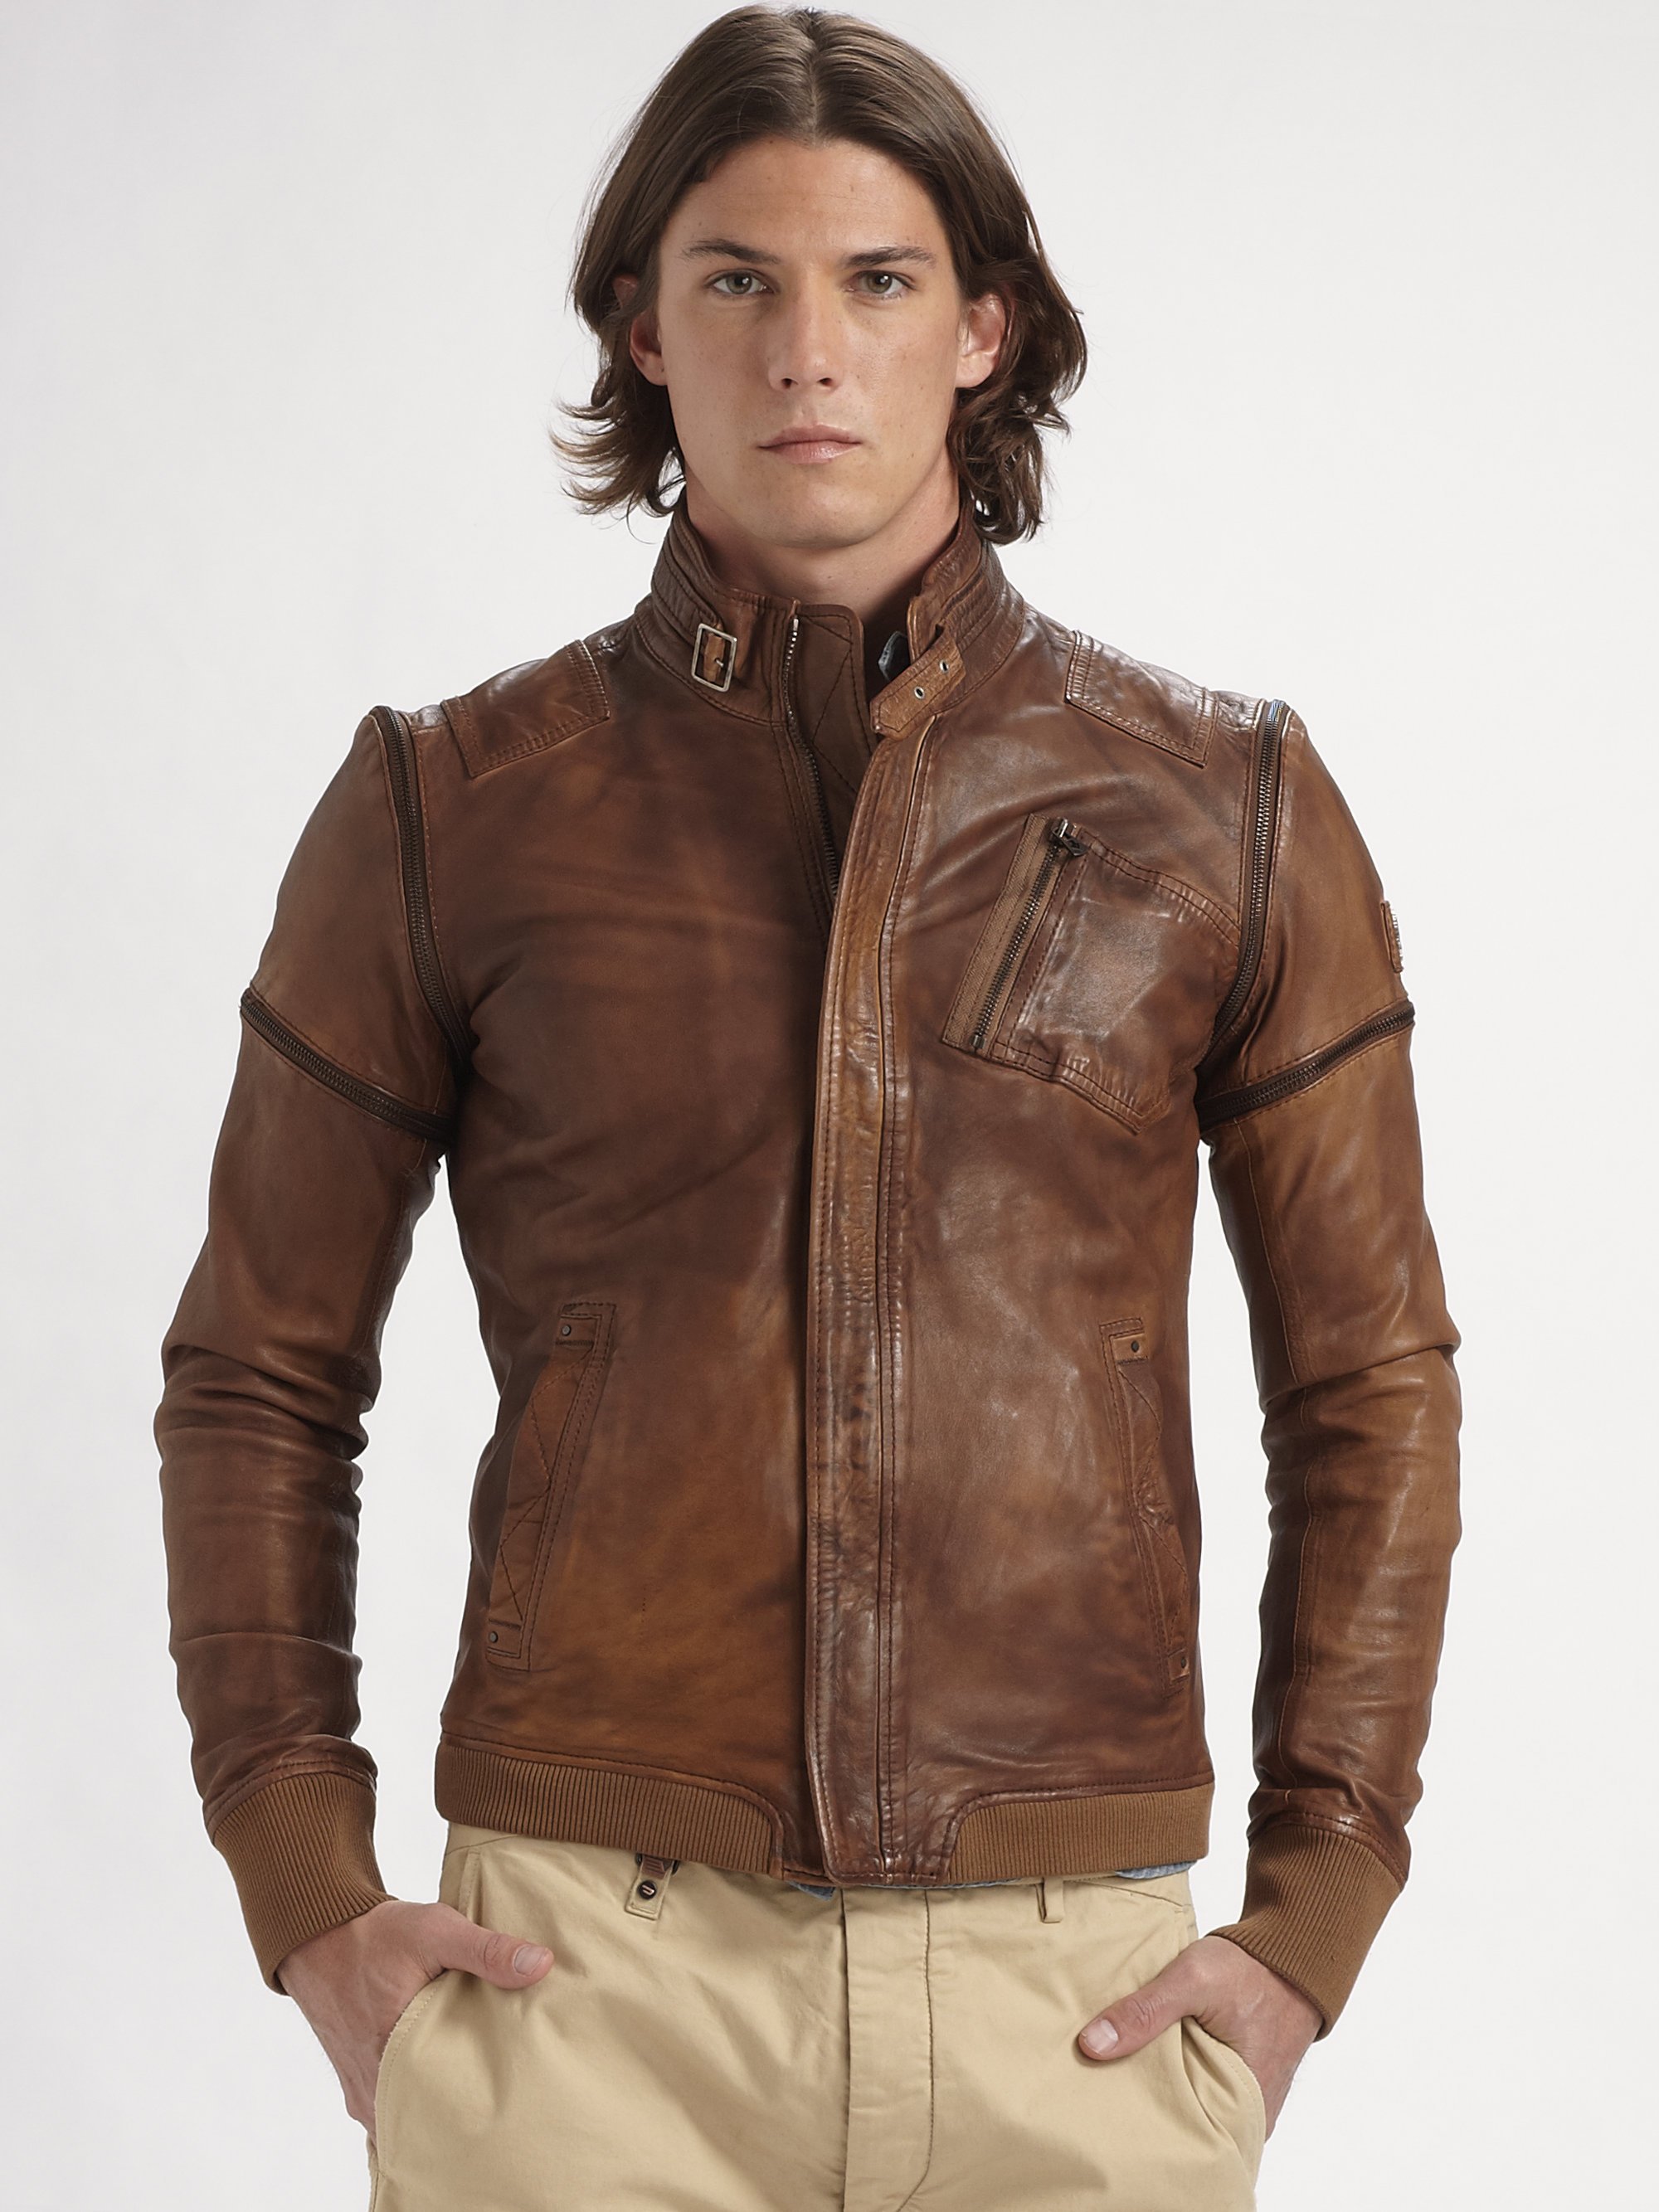 Lyst - Diesel Convertible Leather Jacket in Brown for Men